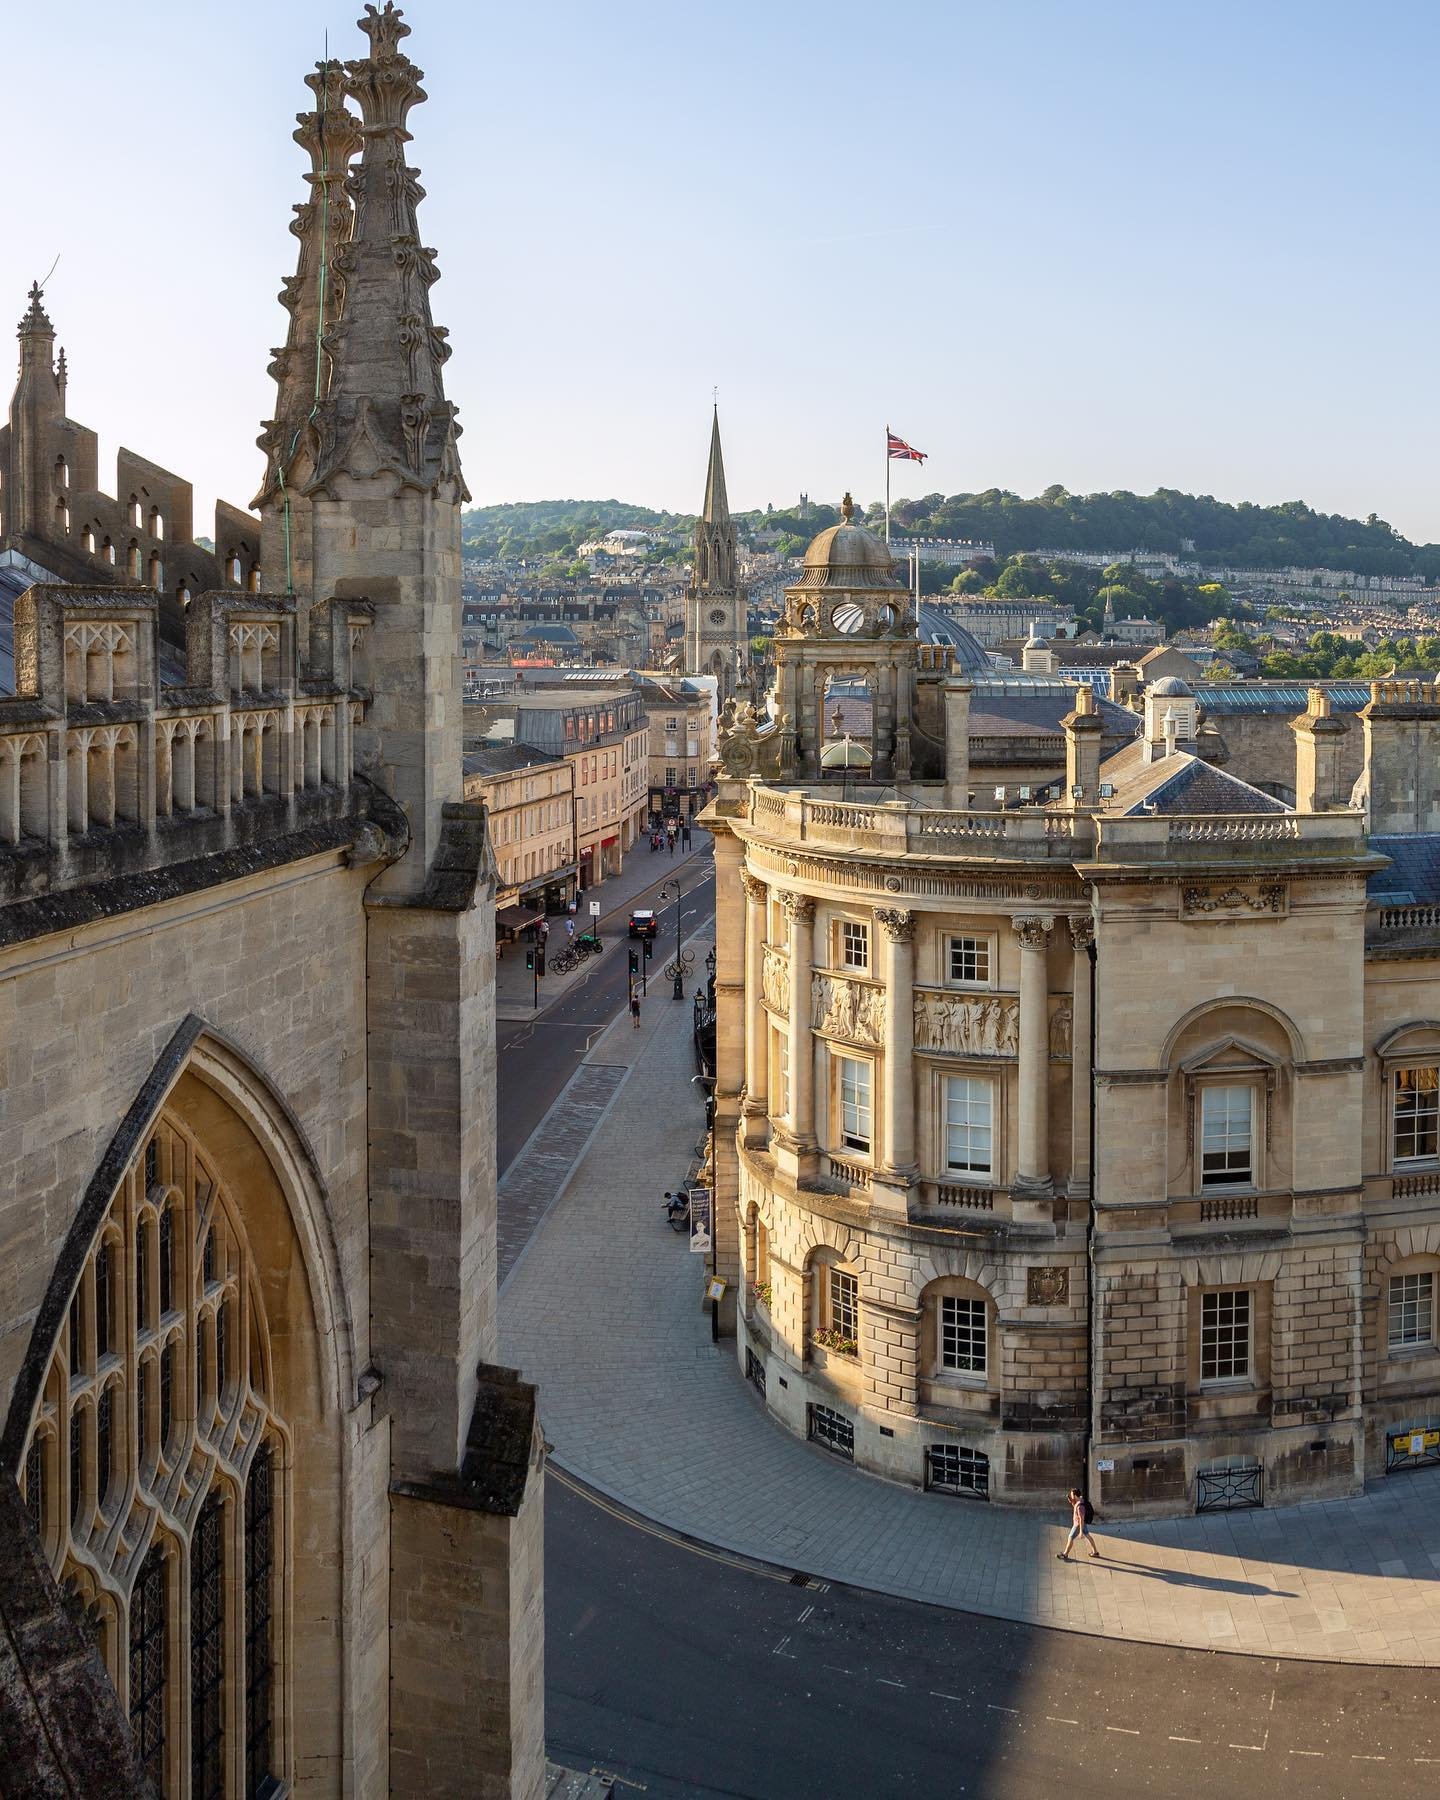 The views from here are incredible!

Journey to the top of Bath Abbey tower to experience a vast panoramic scene of the city, familiar buildings and streets taking on a whole new appearance. This spot is one of my favourites, looking across to the de